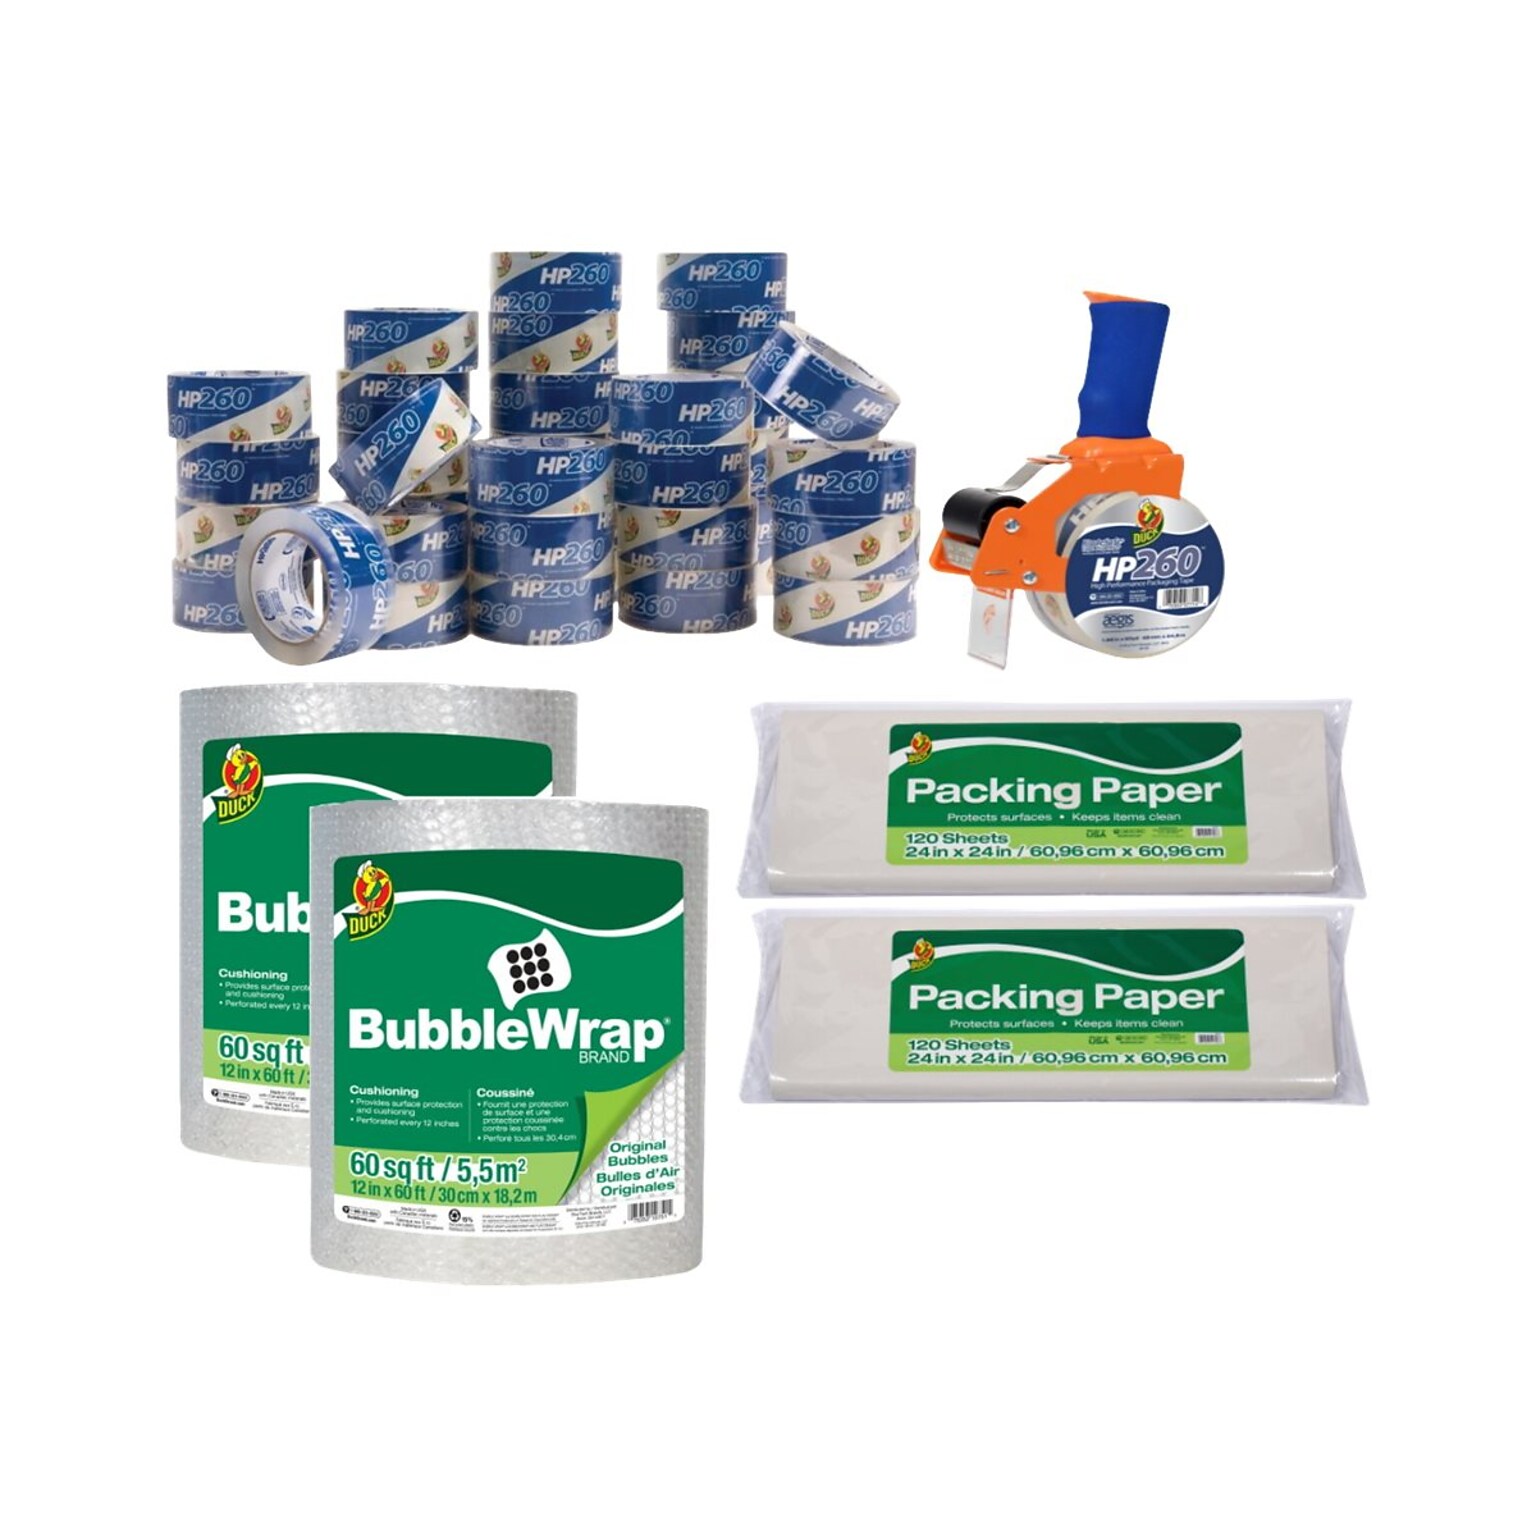 Duck 40 Piece Mailroom Bundle - HP620 Packing Tape 36/Pack + BladeSafe Tape Gun, + 60 Bubble Wrap 2/Pack + Packing Paper 2/Pack